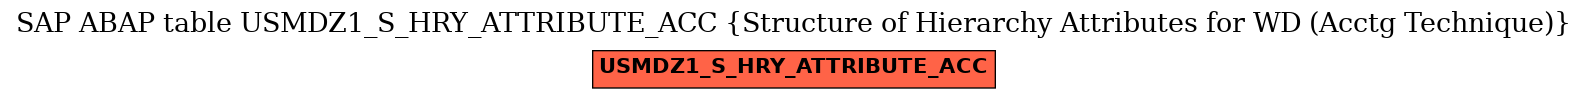 E-R Diagram for table USMDZ1_S_HRY_ATTRIBUTE_ACC (Structure of Hierarchy Attributes for WD (Acctg Technique))